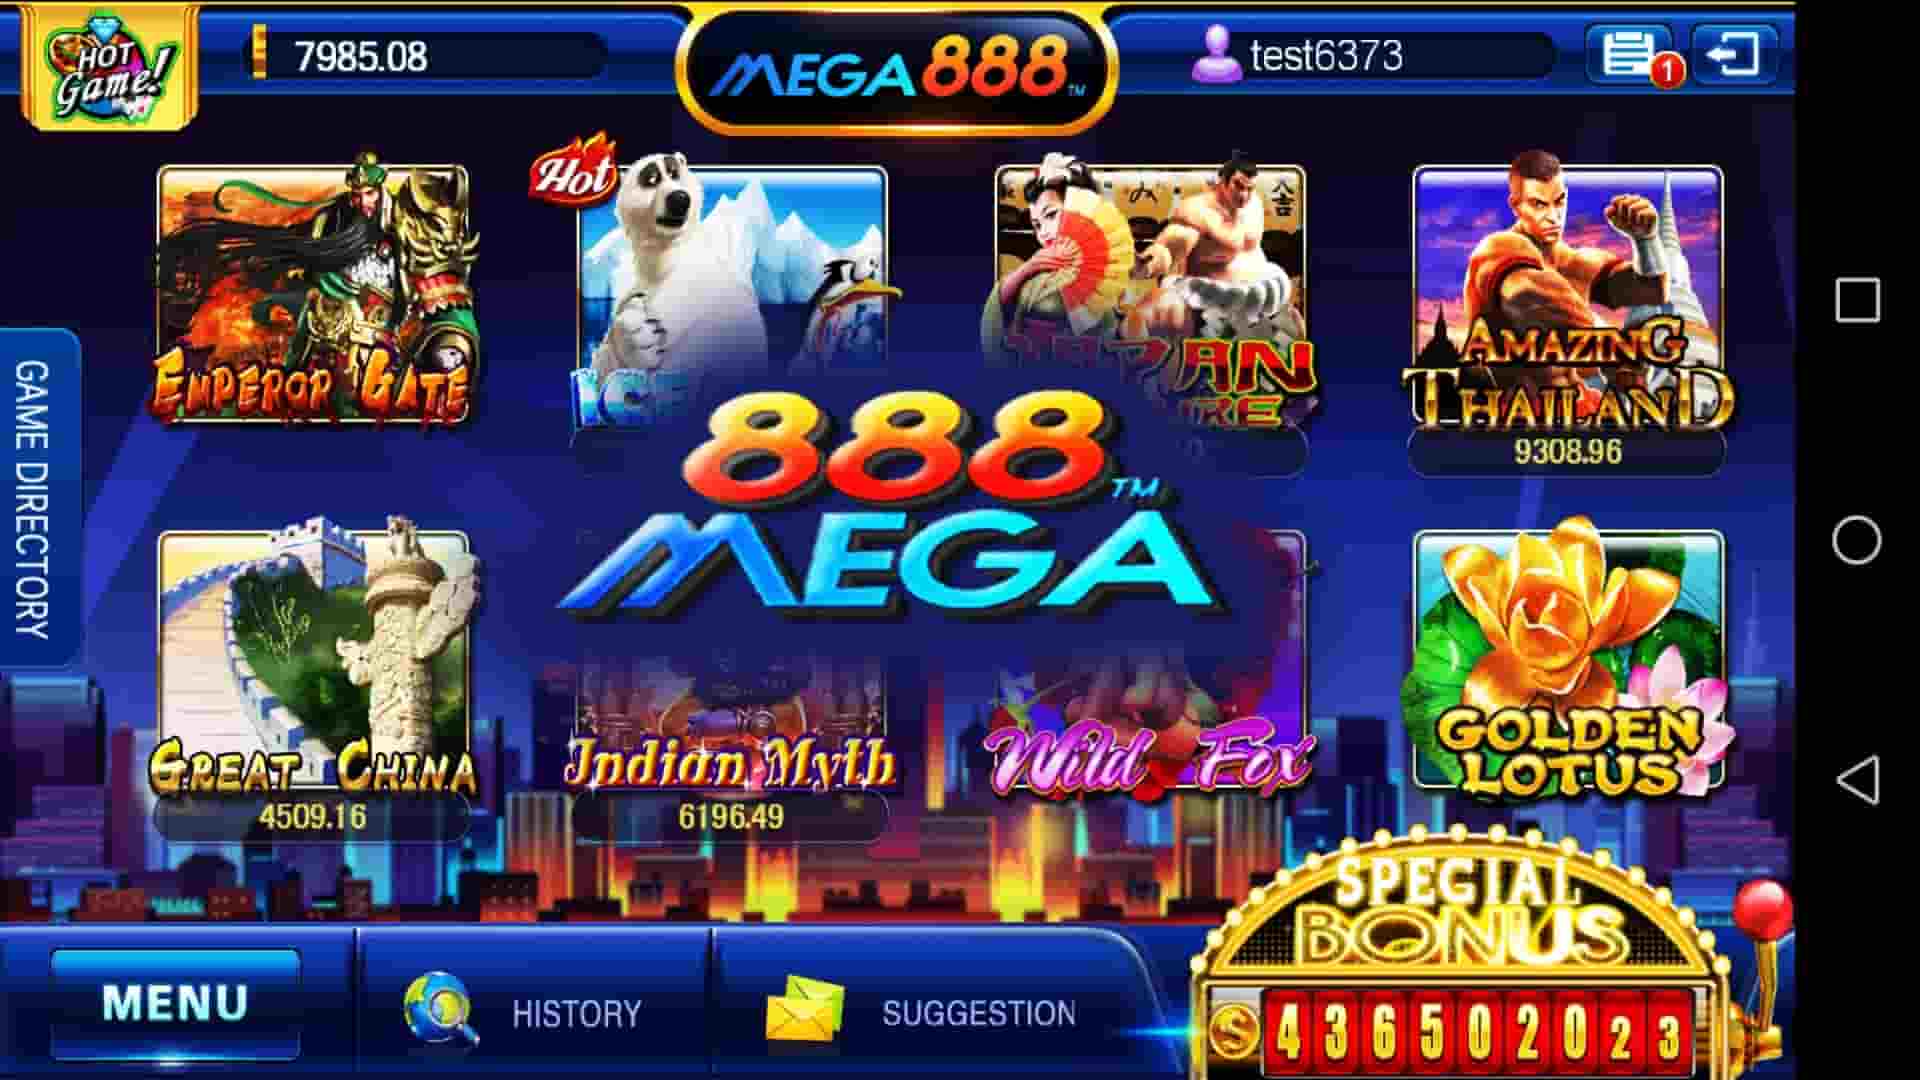 Games available on mega888